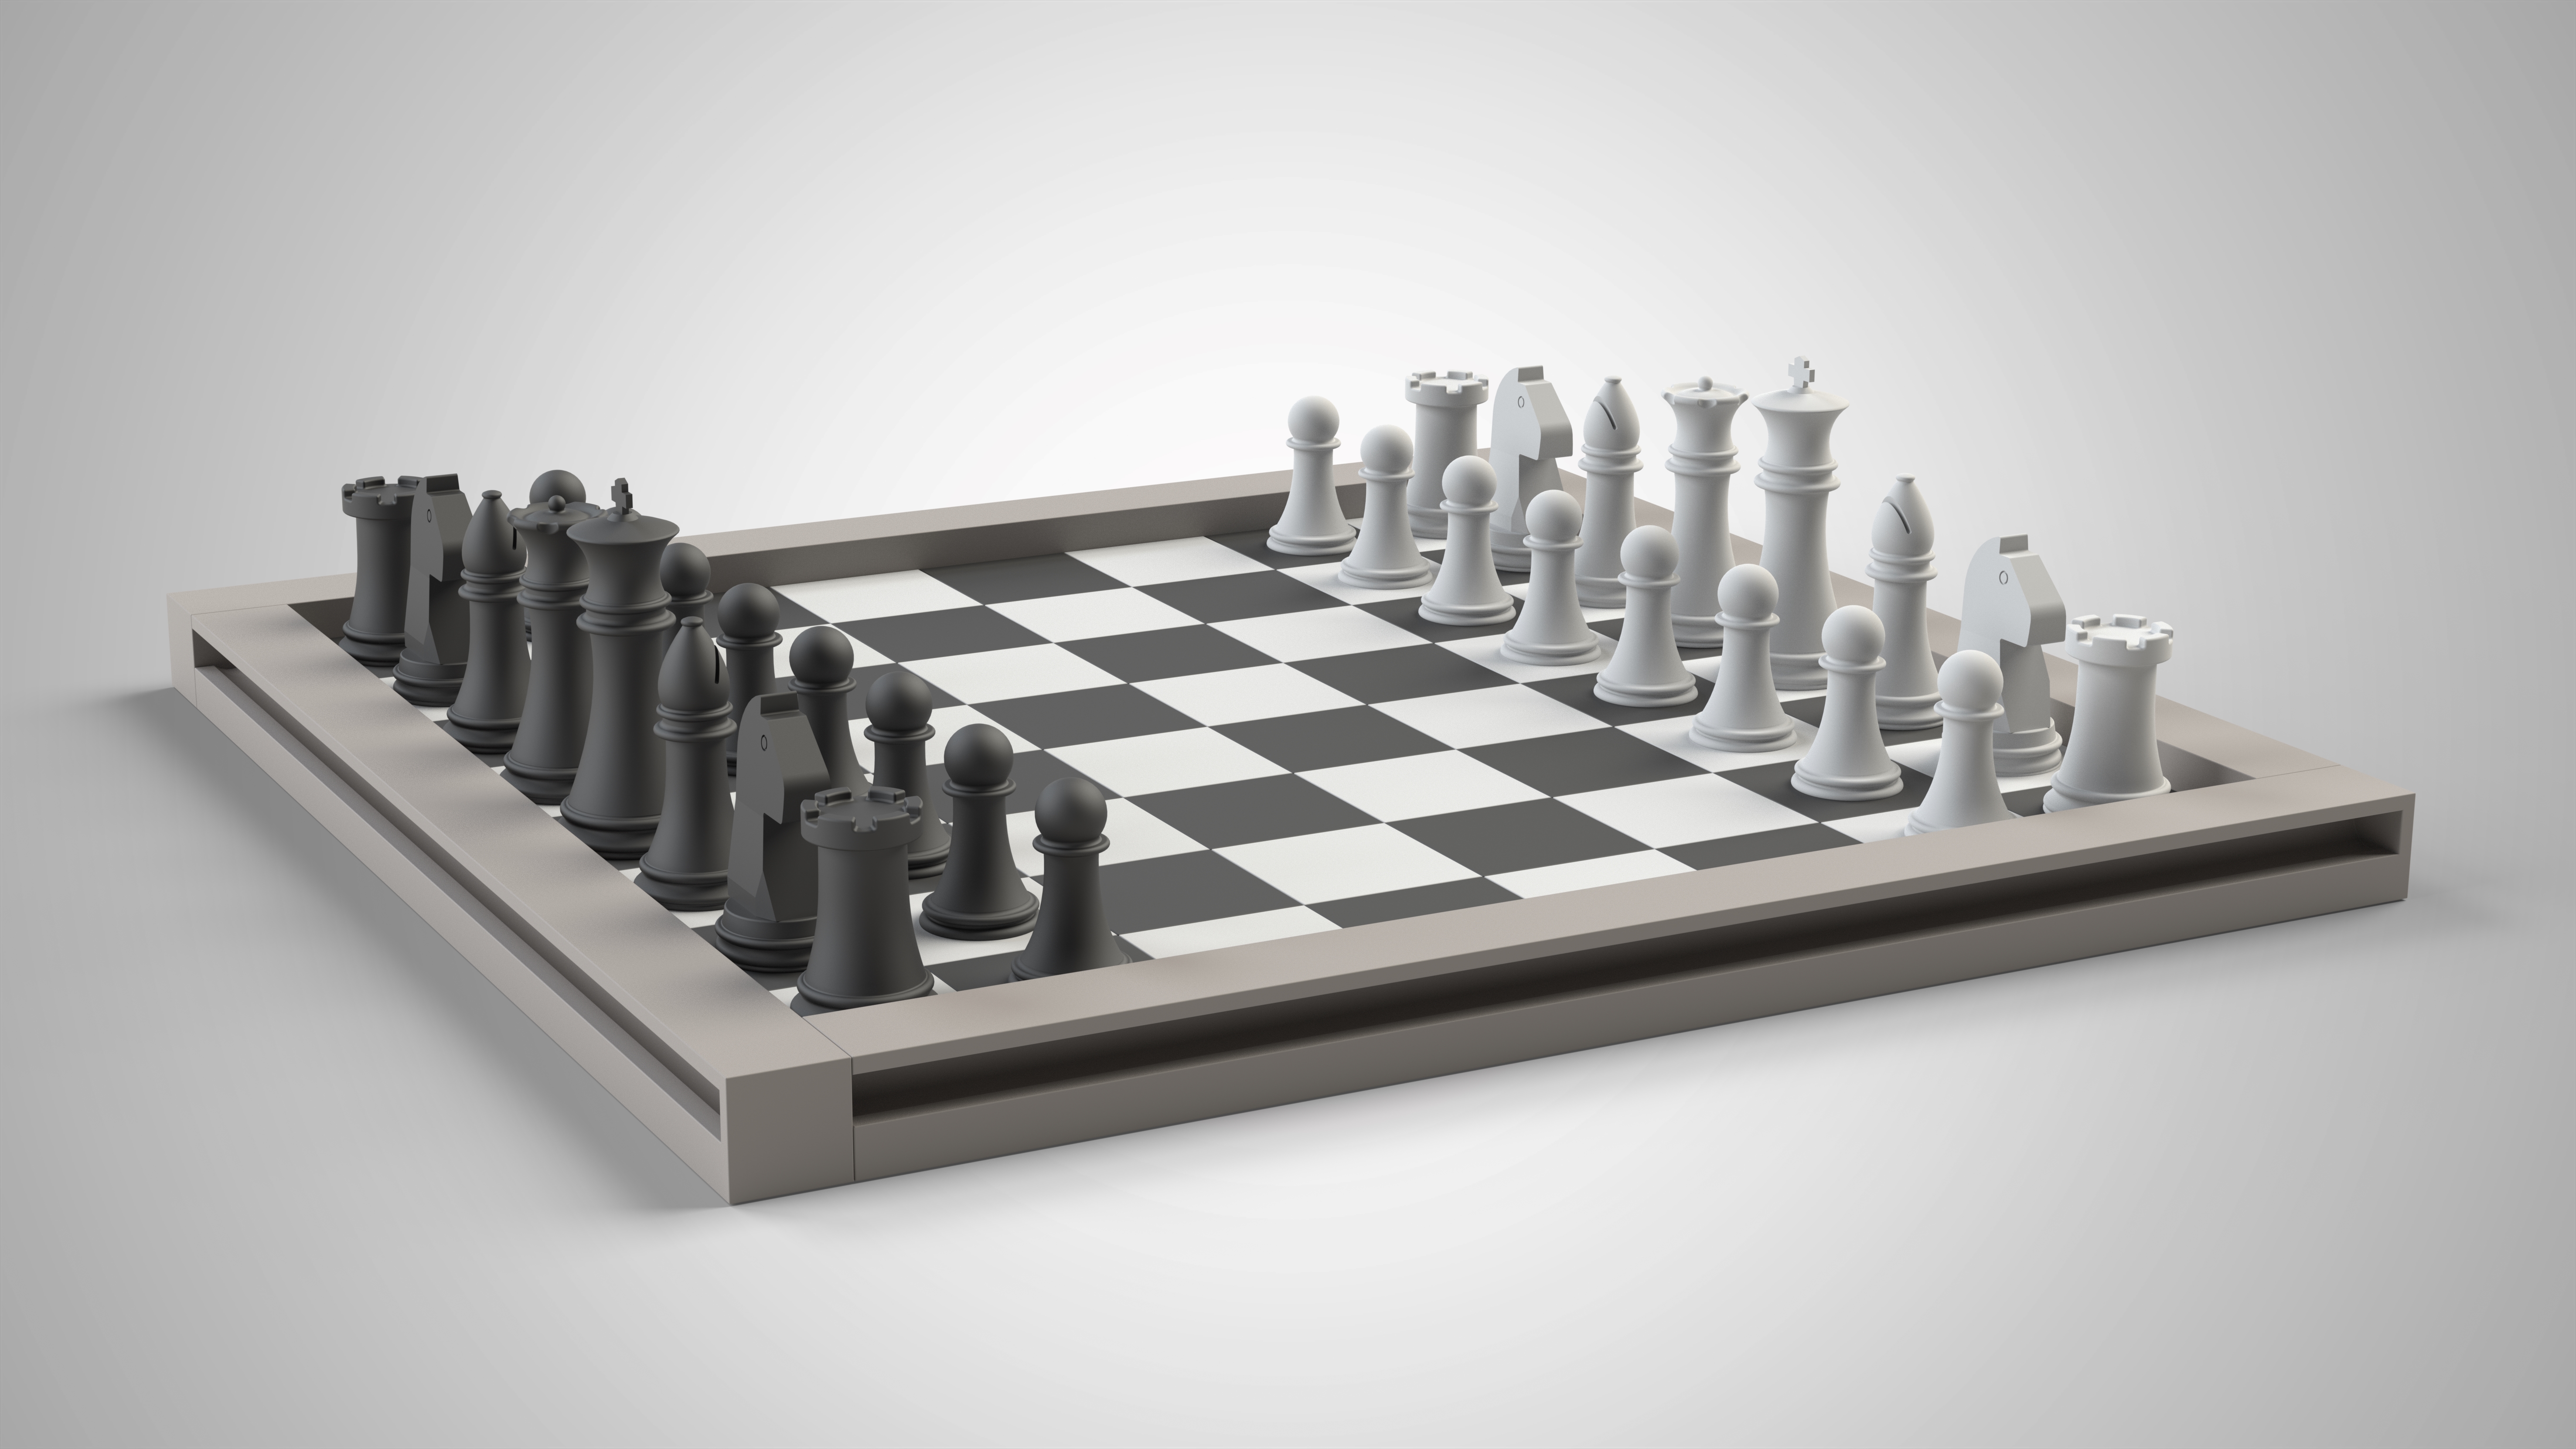 Jigsaw Puzzle Chess Board